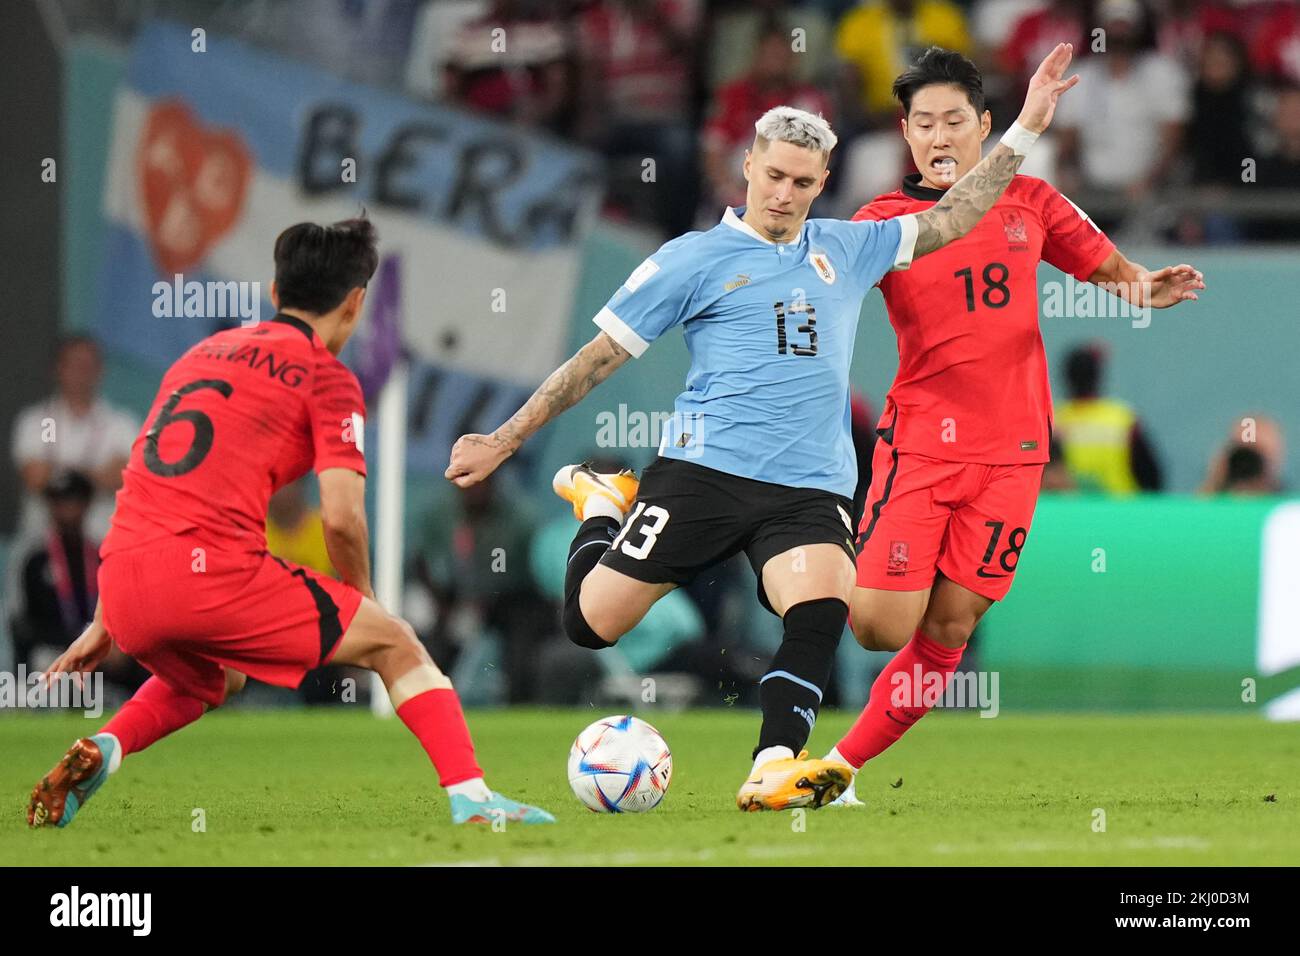 Rayan, Qatar. 23rd Nov, 2022. Guillermo Varela of Uruguay and Lee Kangin of Korea Republic during the Qatar 2022 World Cup match, group H, date 1, between Uruguay and Korea Republic played at Education City Stadium on Nov 24, 2022 in Rayan, Qatar. (Photo by Bagu Blanco/PRESSINPHOTO) Credit: PRESSINPHOTO SPORTS AGENCY/Alamy Live News Stock Photo